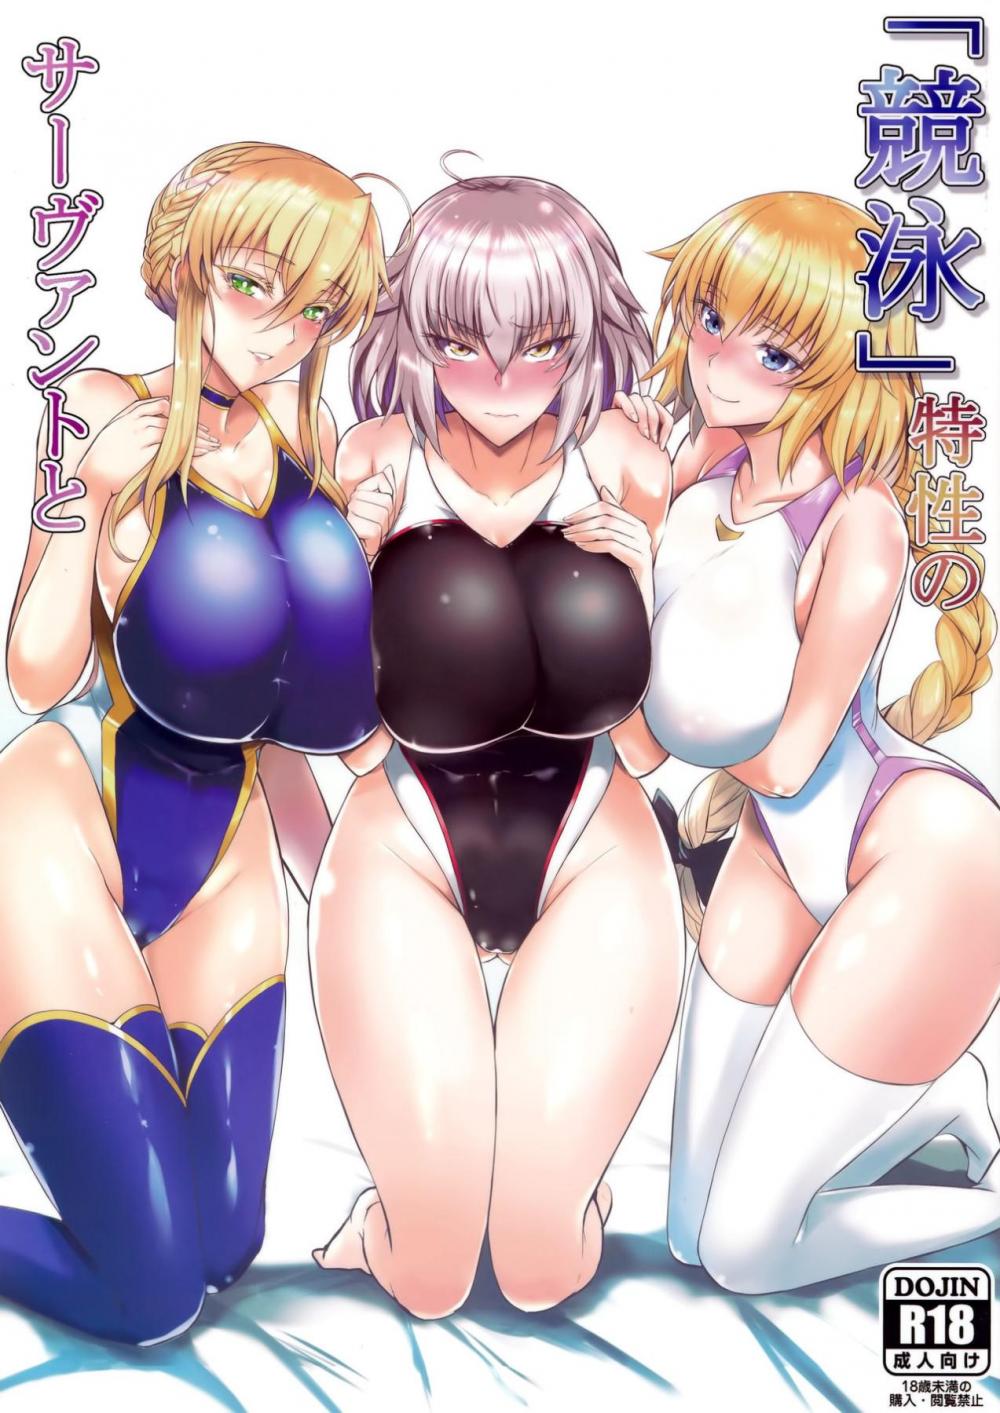 Hentai Manga Comic-A "Swimming Race" With My Special Servant-Read-1